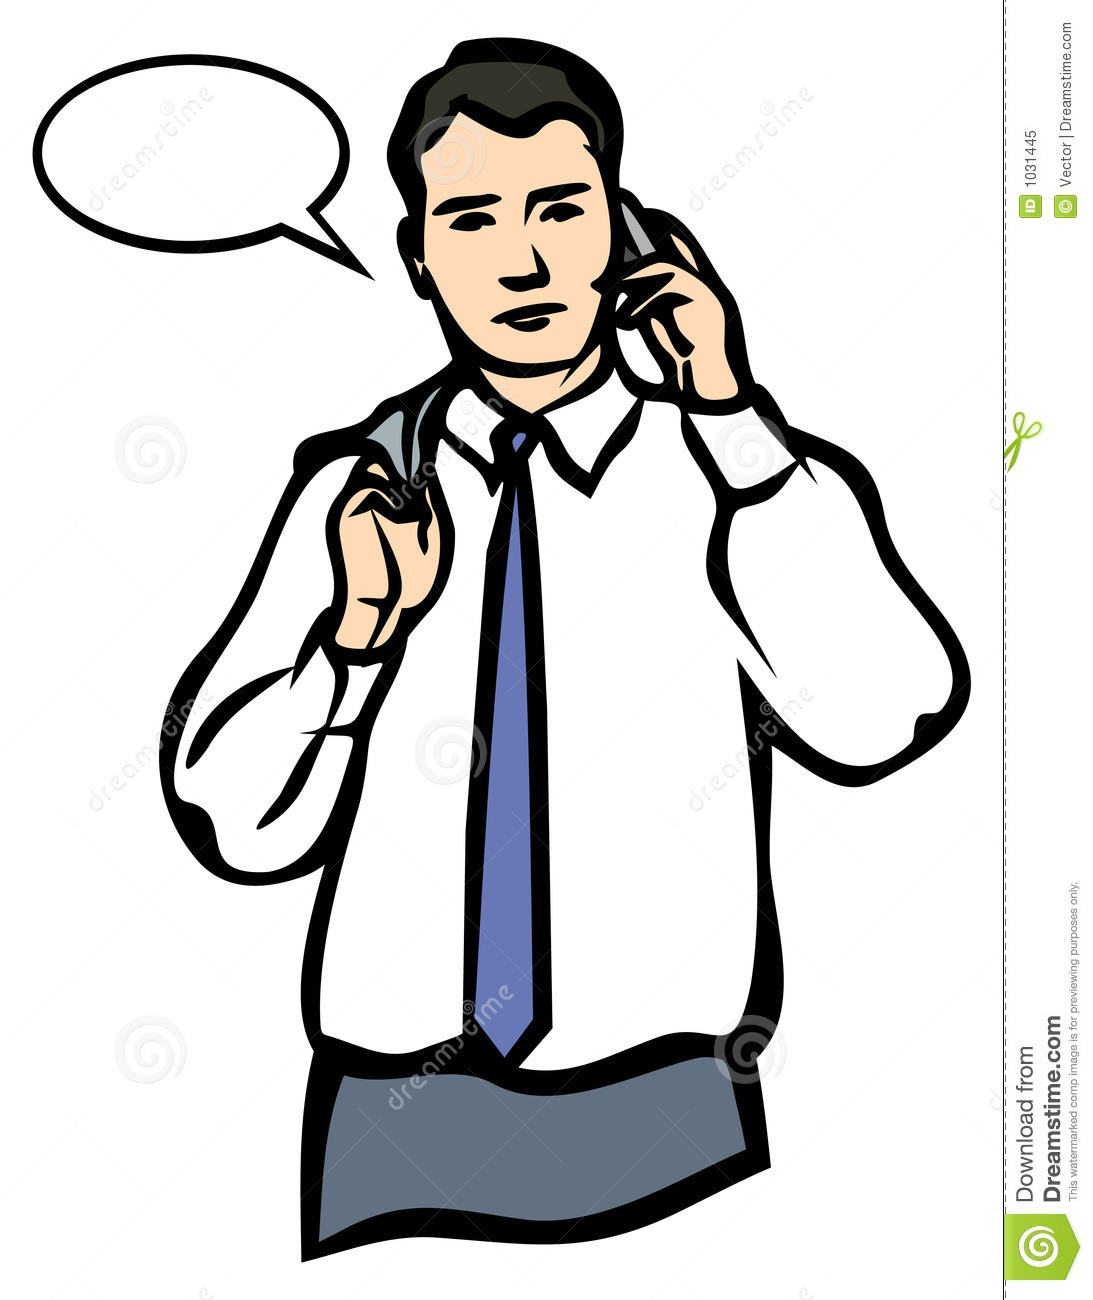 Man Speaking On A Mobile Phone  Jpg And Eps Royalty Free Stock Photo    